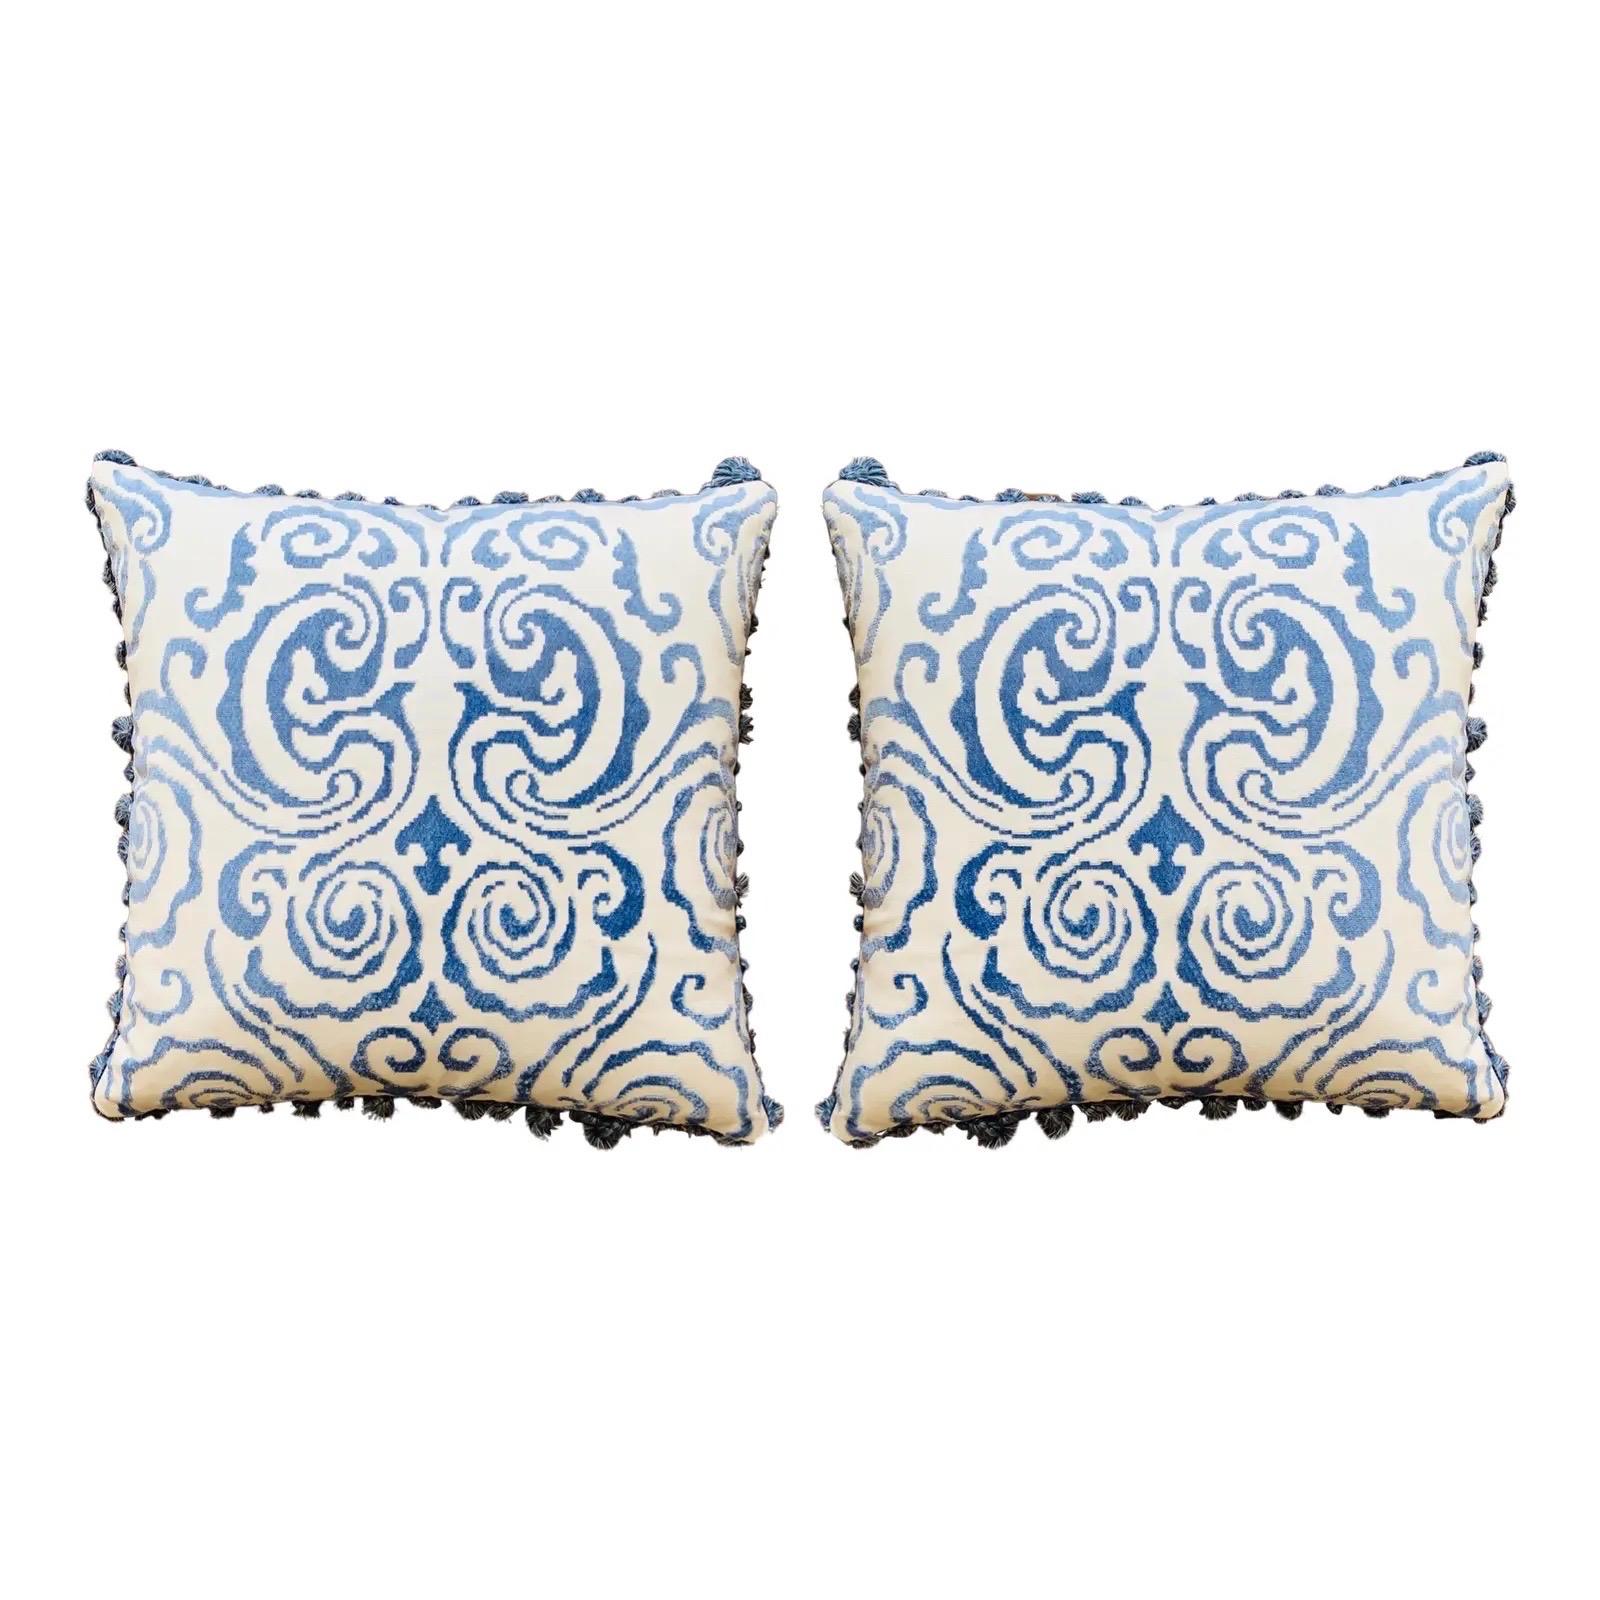 Scalamandré 'Cirrus Velvet Damask' White and Blue Pillows With Fringe, Pair For Sale